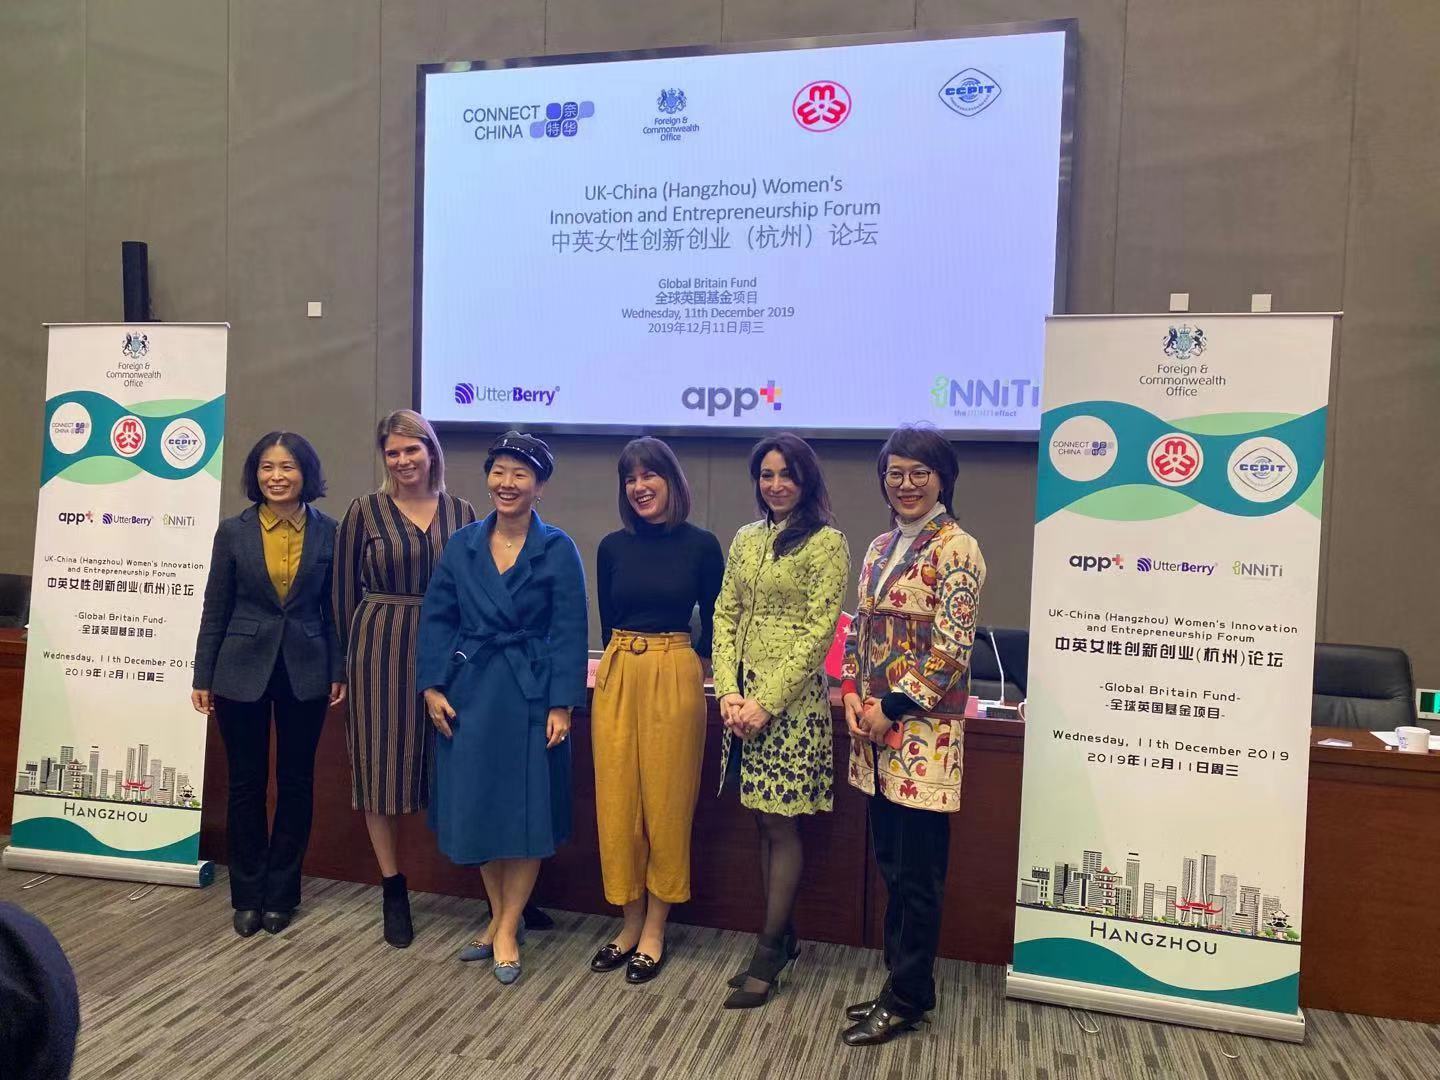 The iNNiTi Effect supports women in business in China